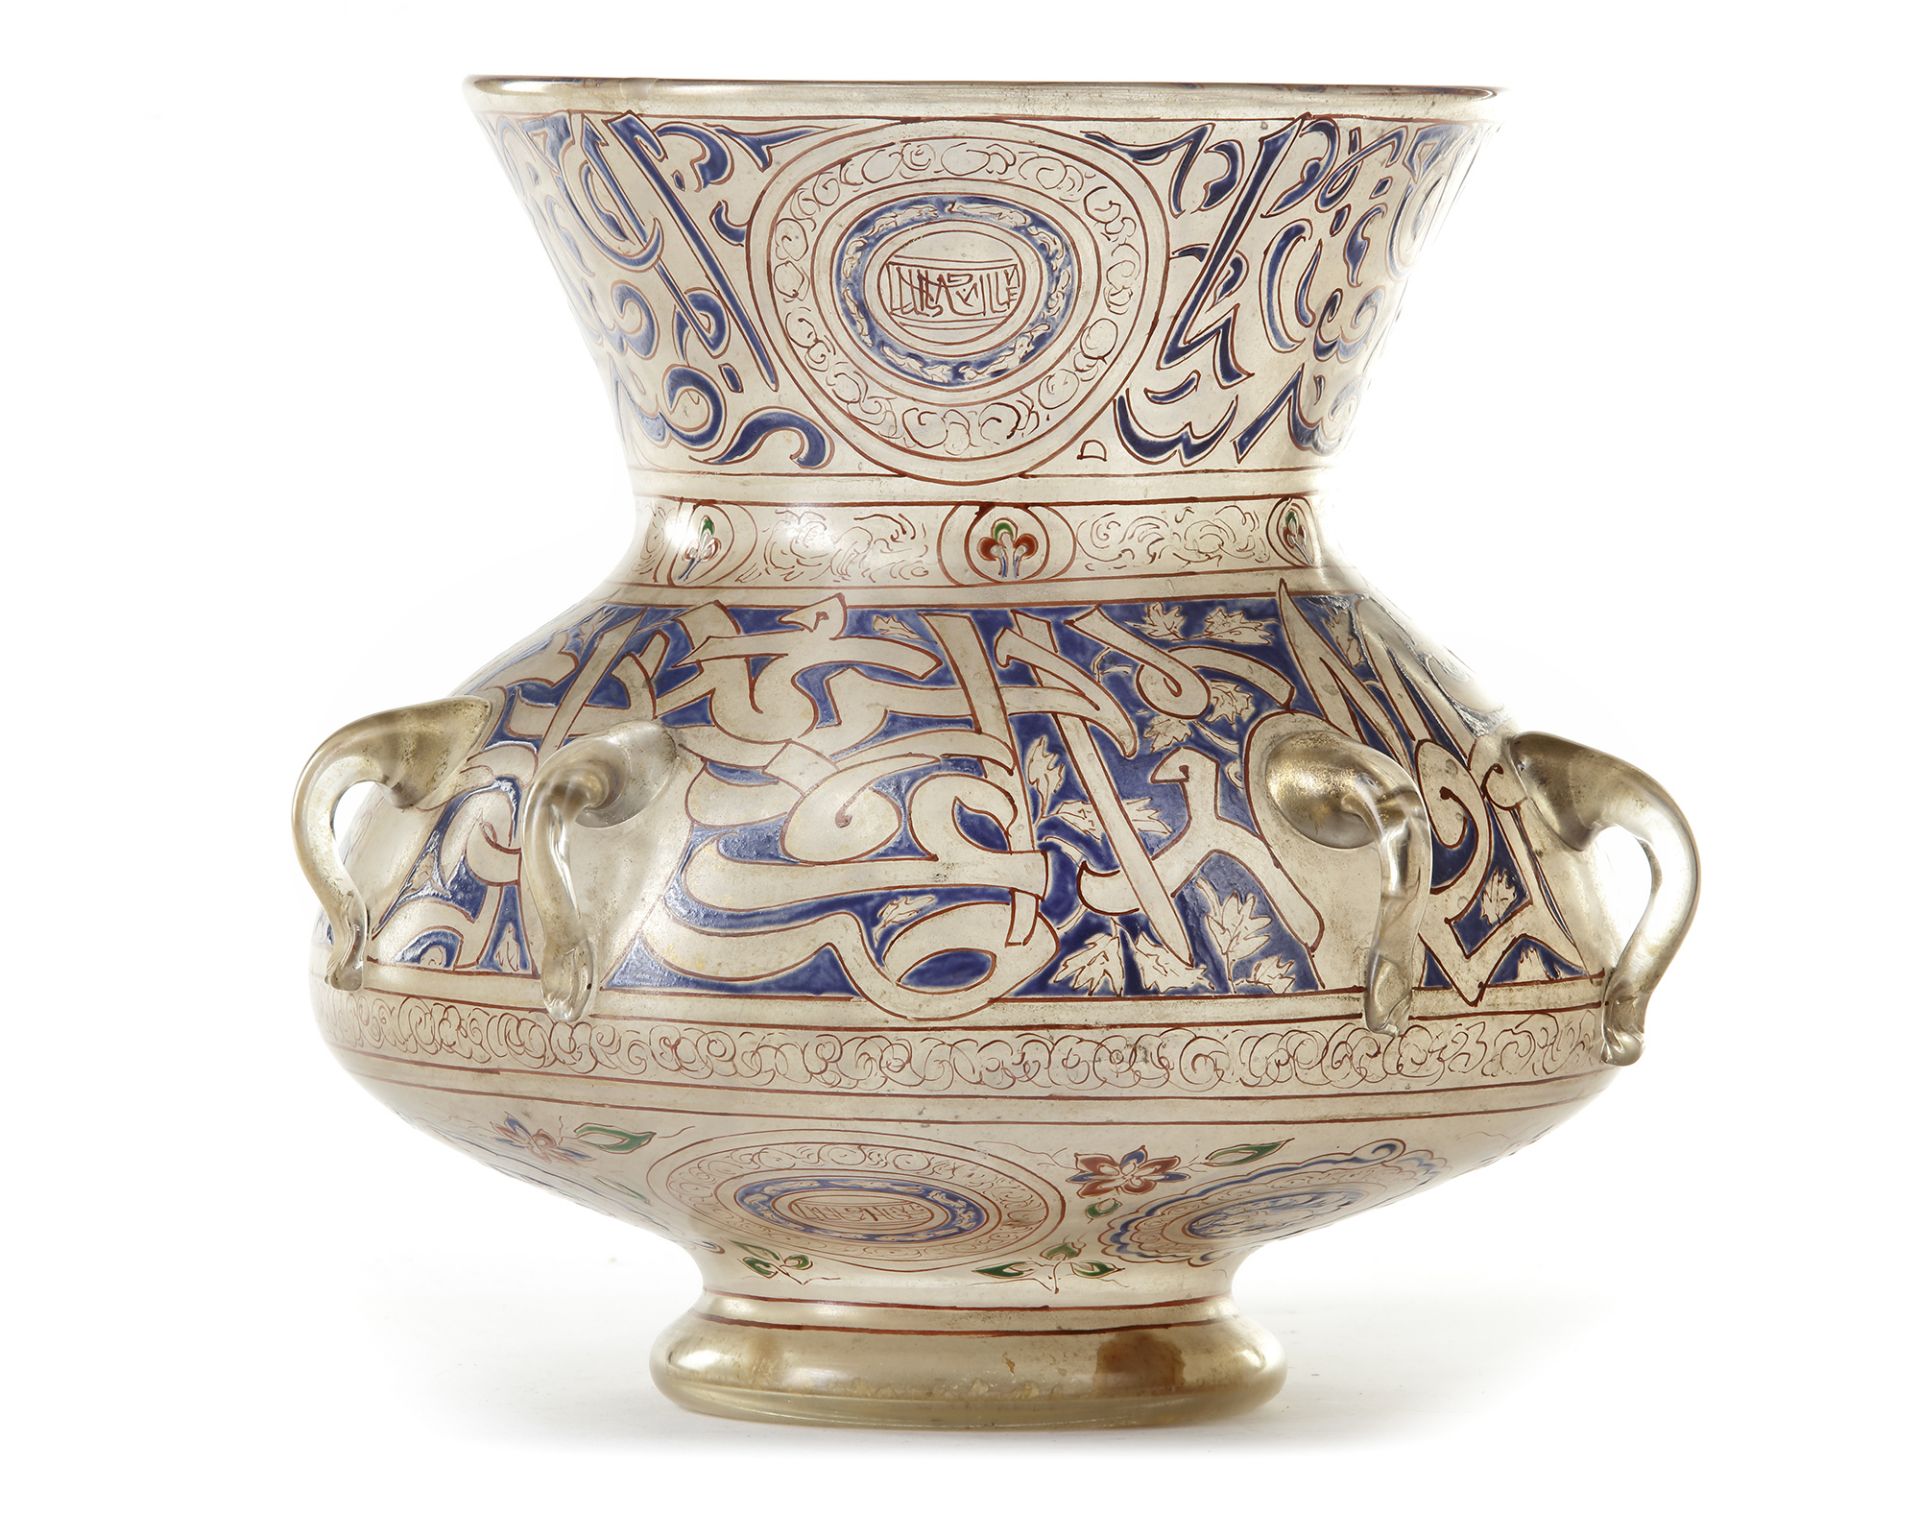 A MAMLUK-STYLE ENAMELLED CLEAR GLASS MOSQUE LAMP POSSIBLY BROCARD, FRANCE, SECOND HALF 19TH CENTURY - Image 3 of 10